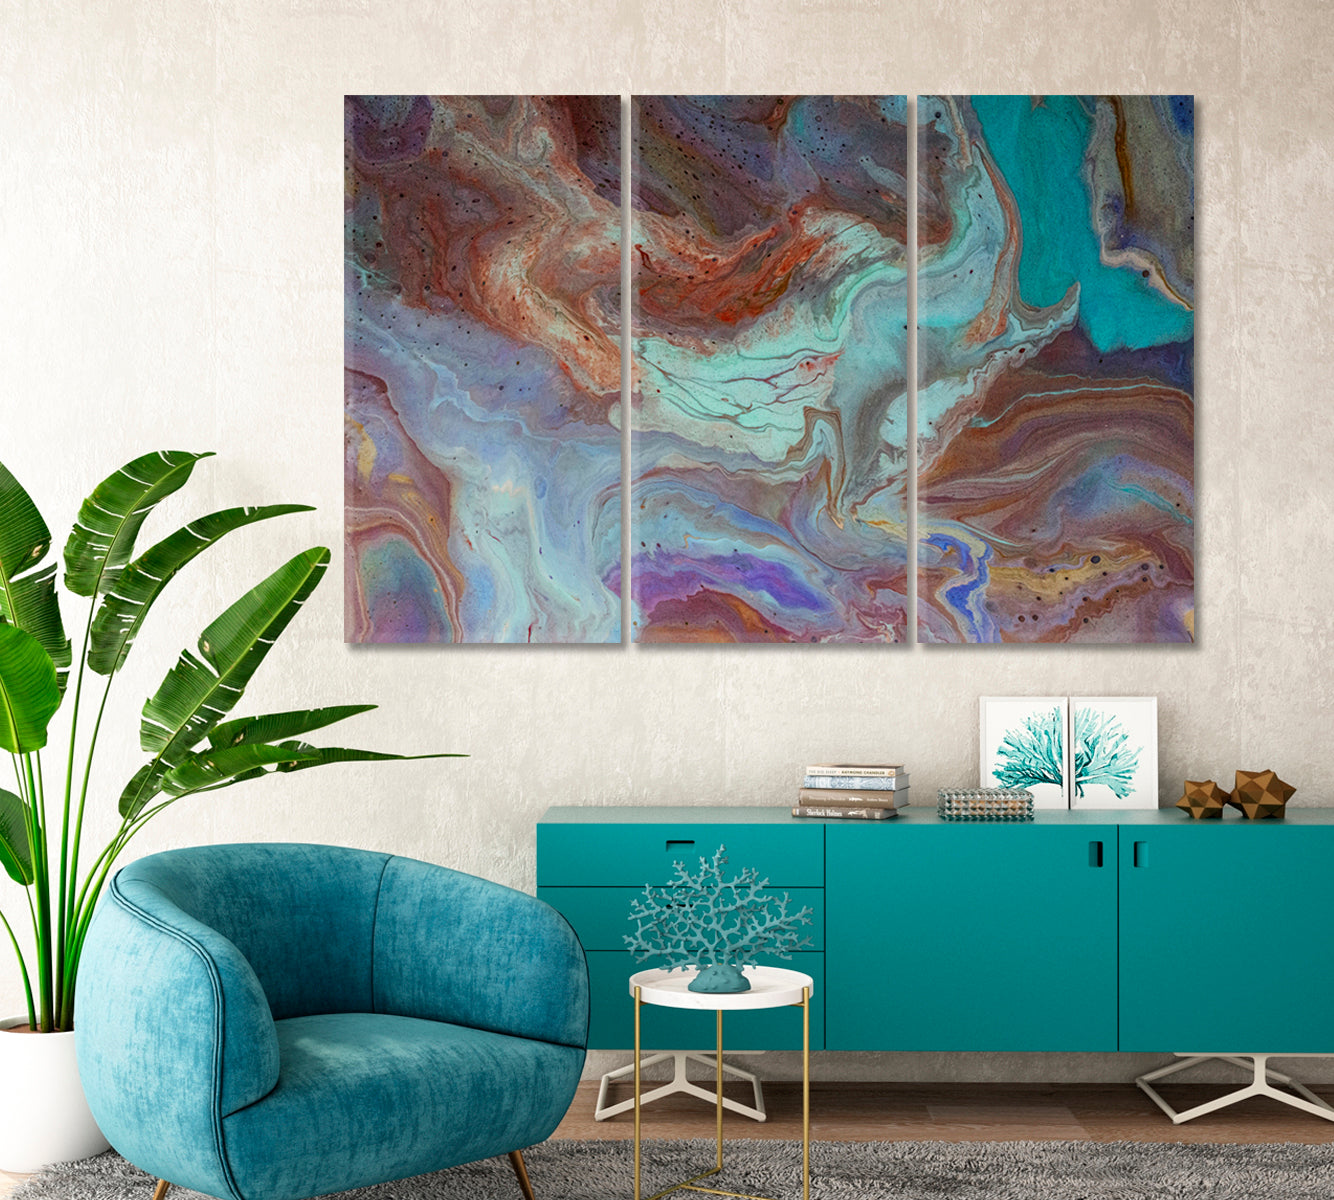 Abstract Fluid Colorful Mix of Vibrant Marble Swirls Canvas Print-Canvas Print-CetArt-1 Panel-24x16 inches-CetArt